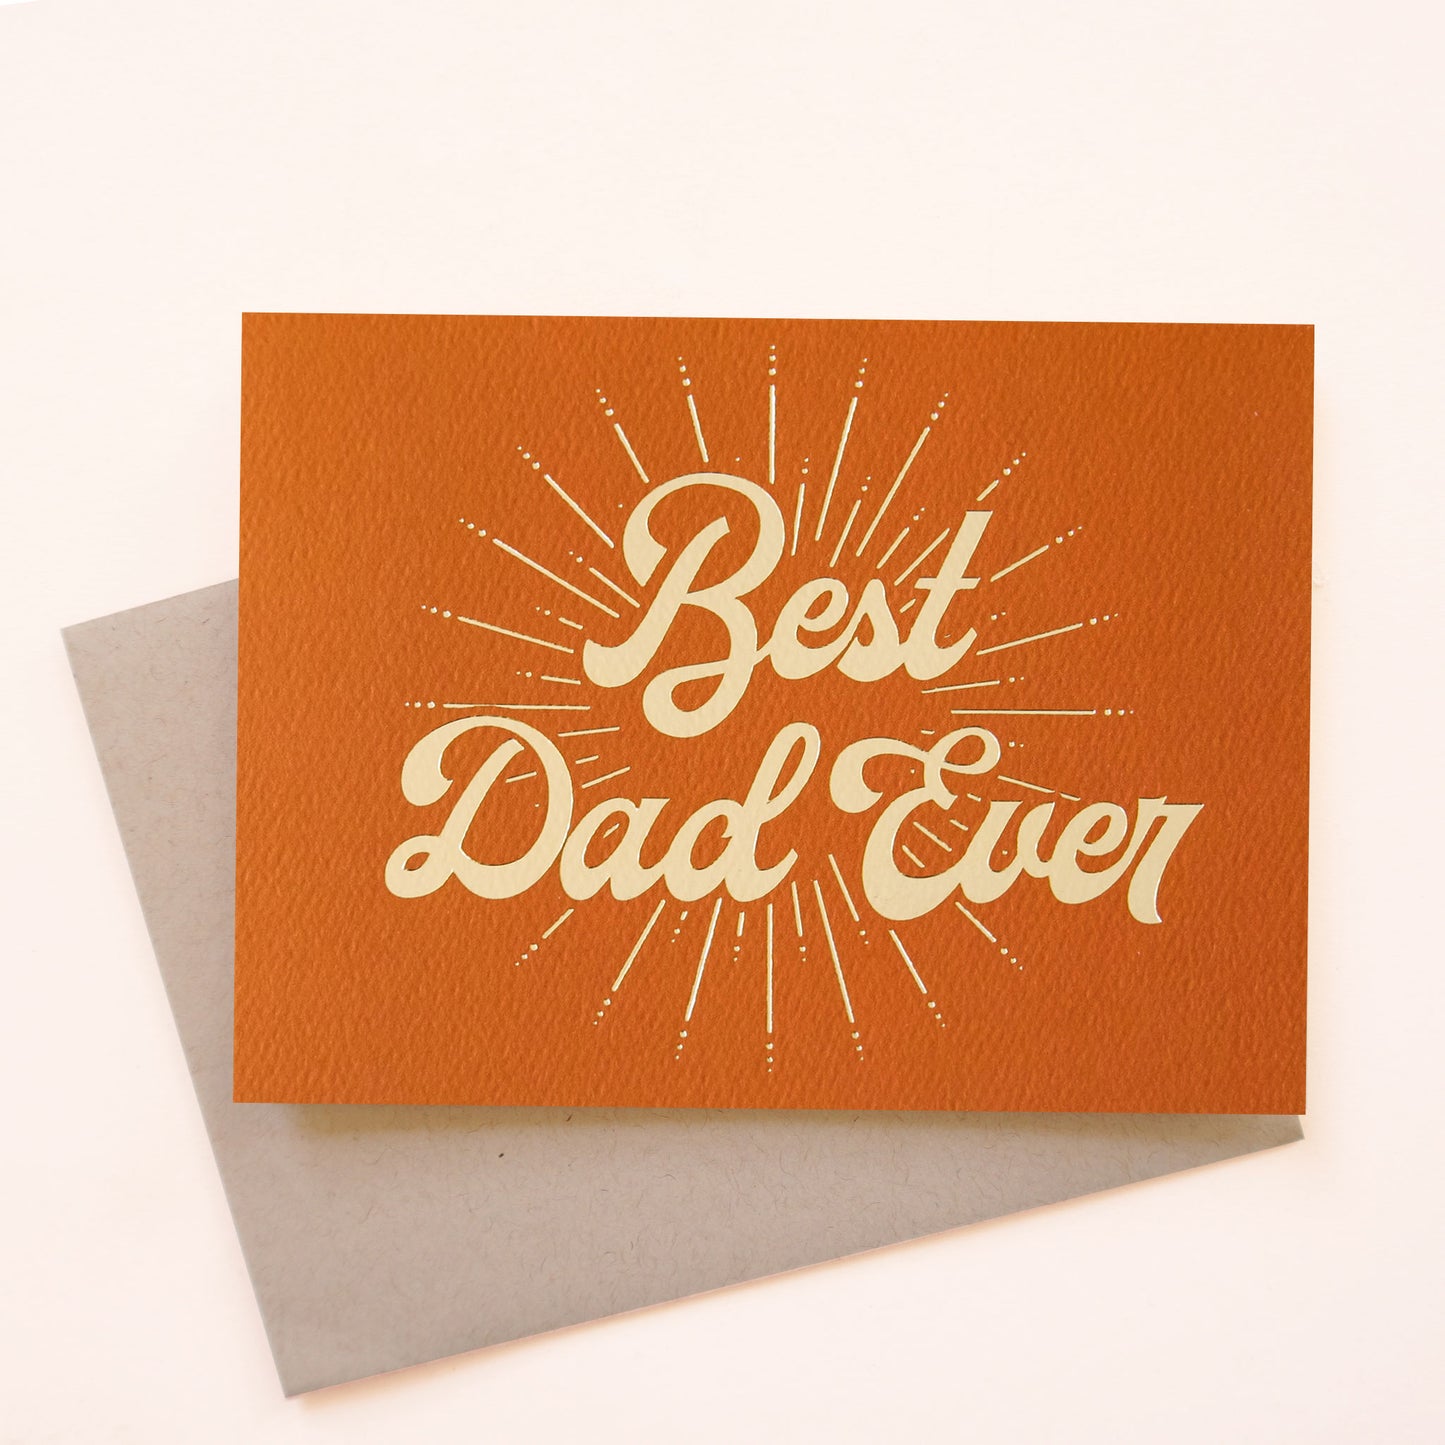 Burnt orange greeting card reading 'Best Dad Ever' in light cursive lettering. A sun burst design accents the text. The card is accompanied by a Kraft brown envelope. 